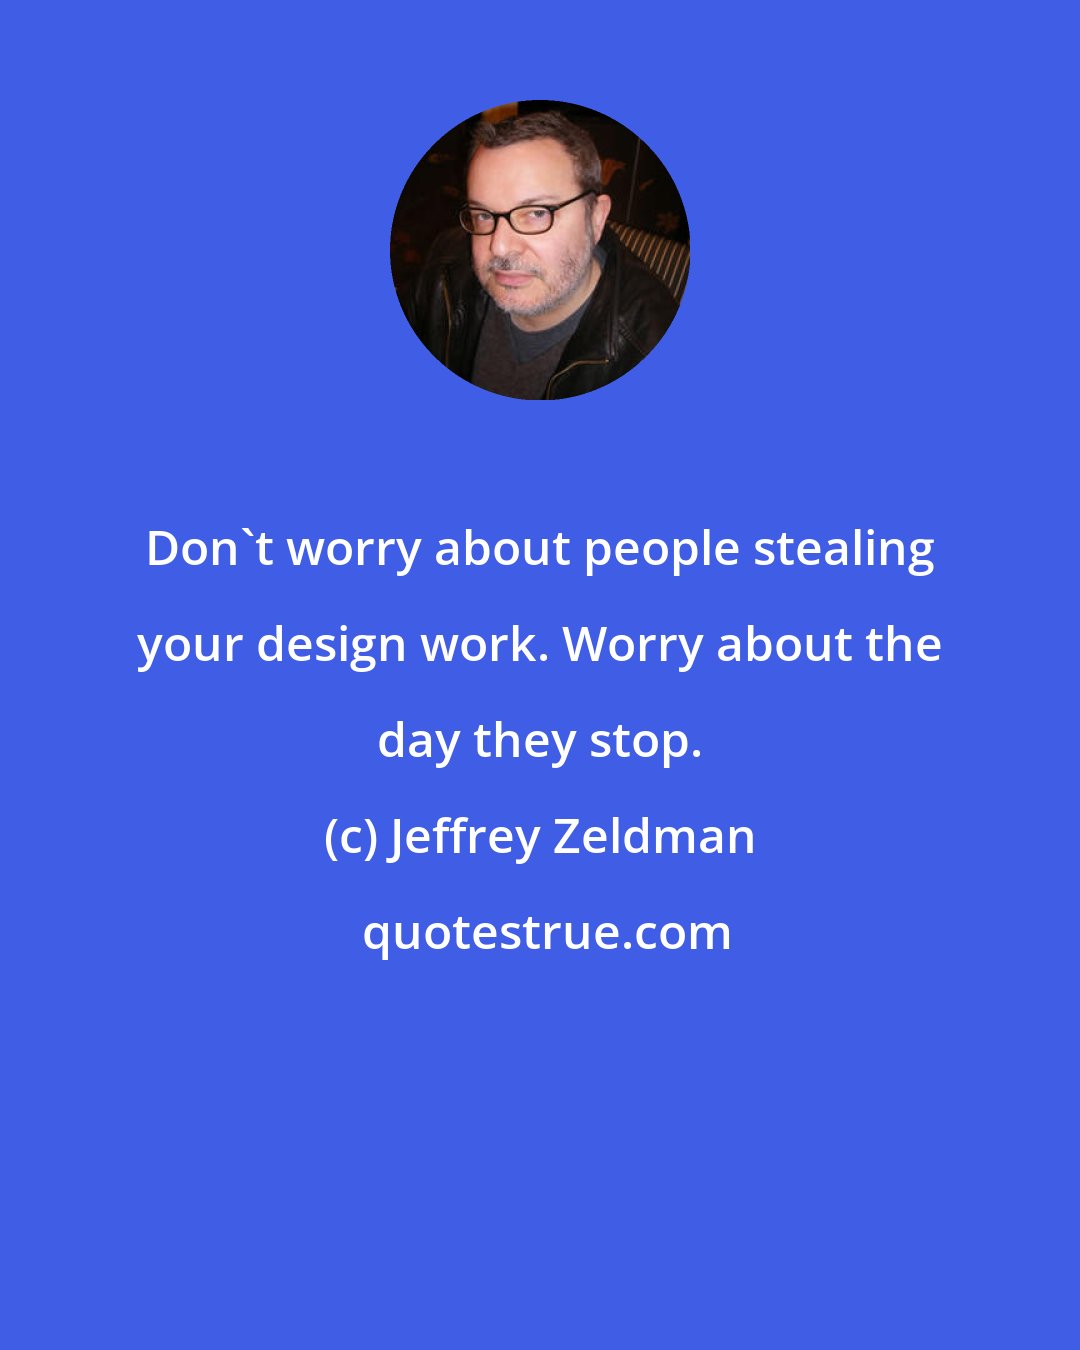 Jeffrey Zeldman: Don't worry about people stealing your design work. Worry about the day they stop.